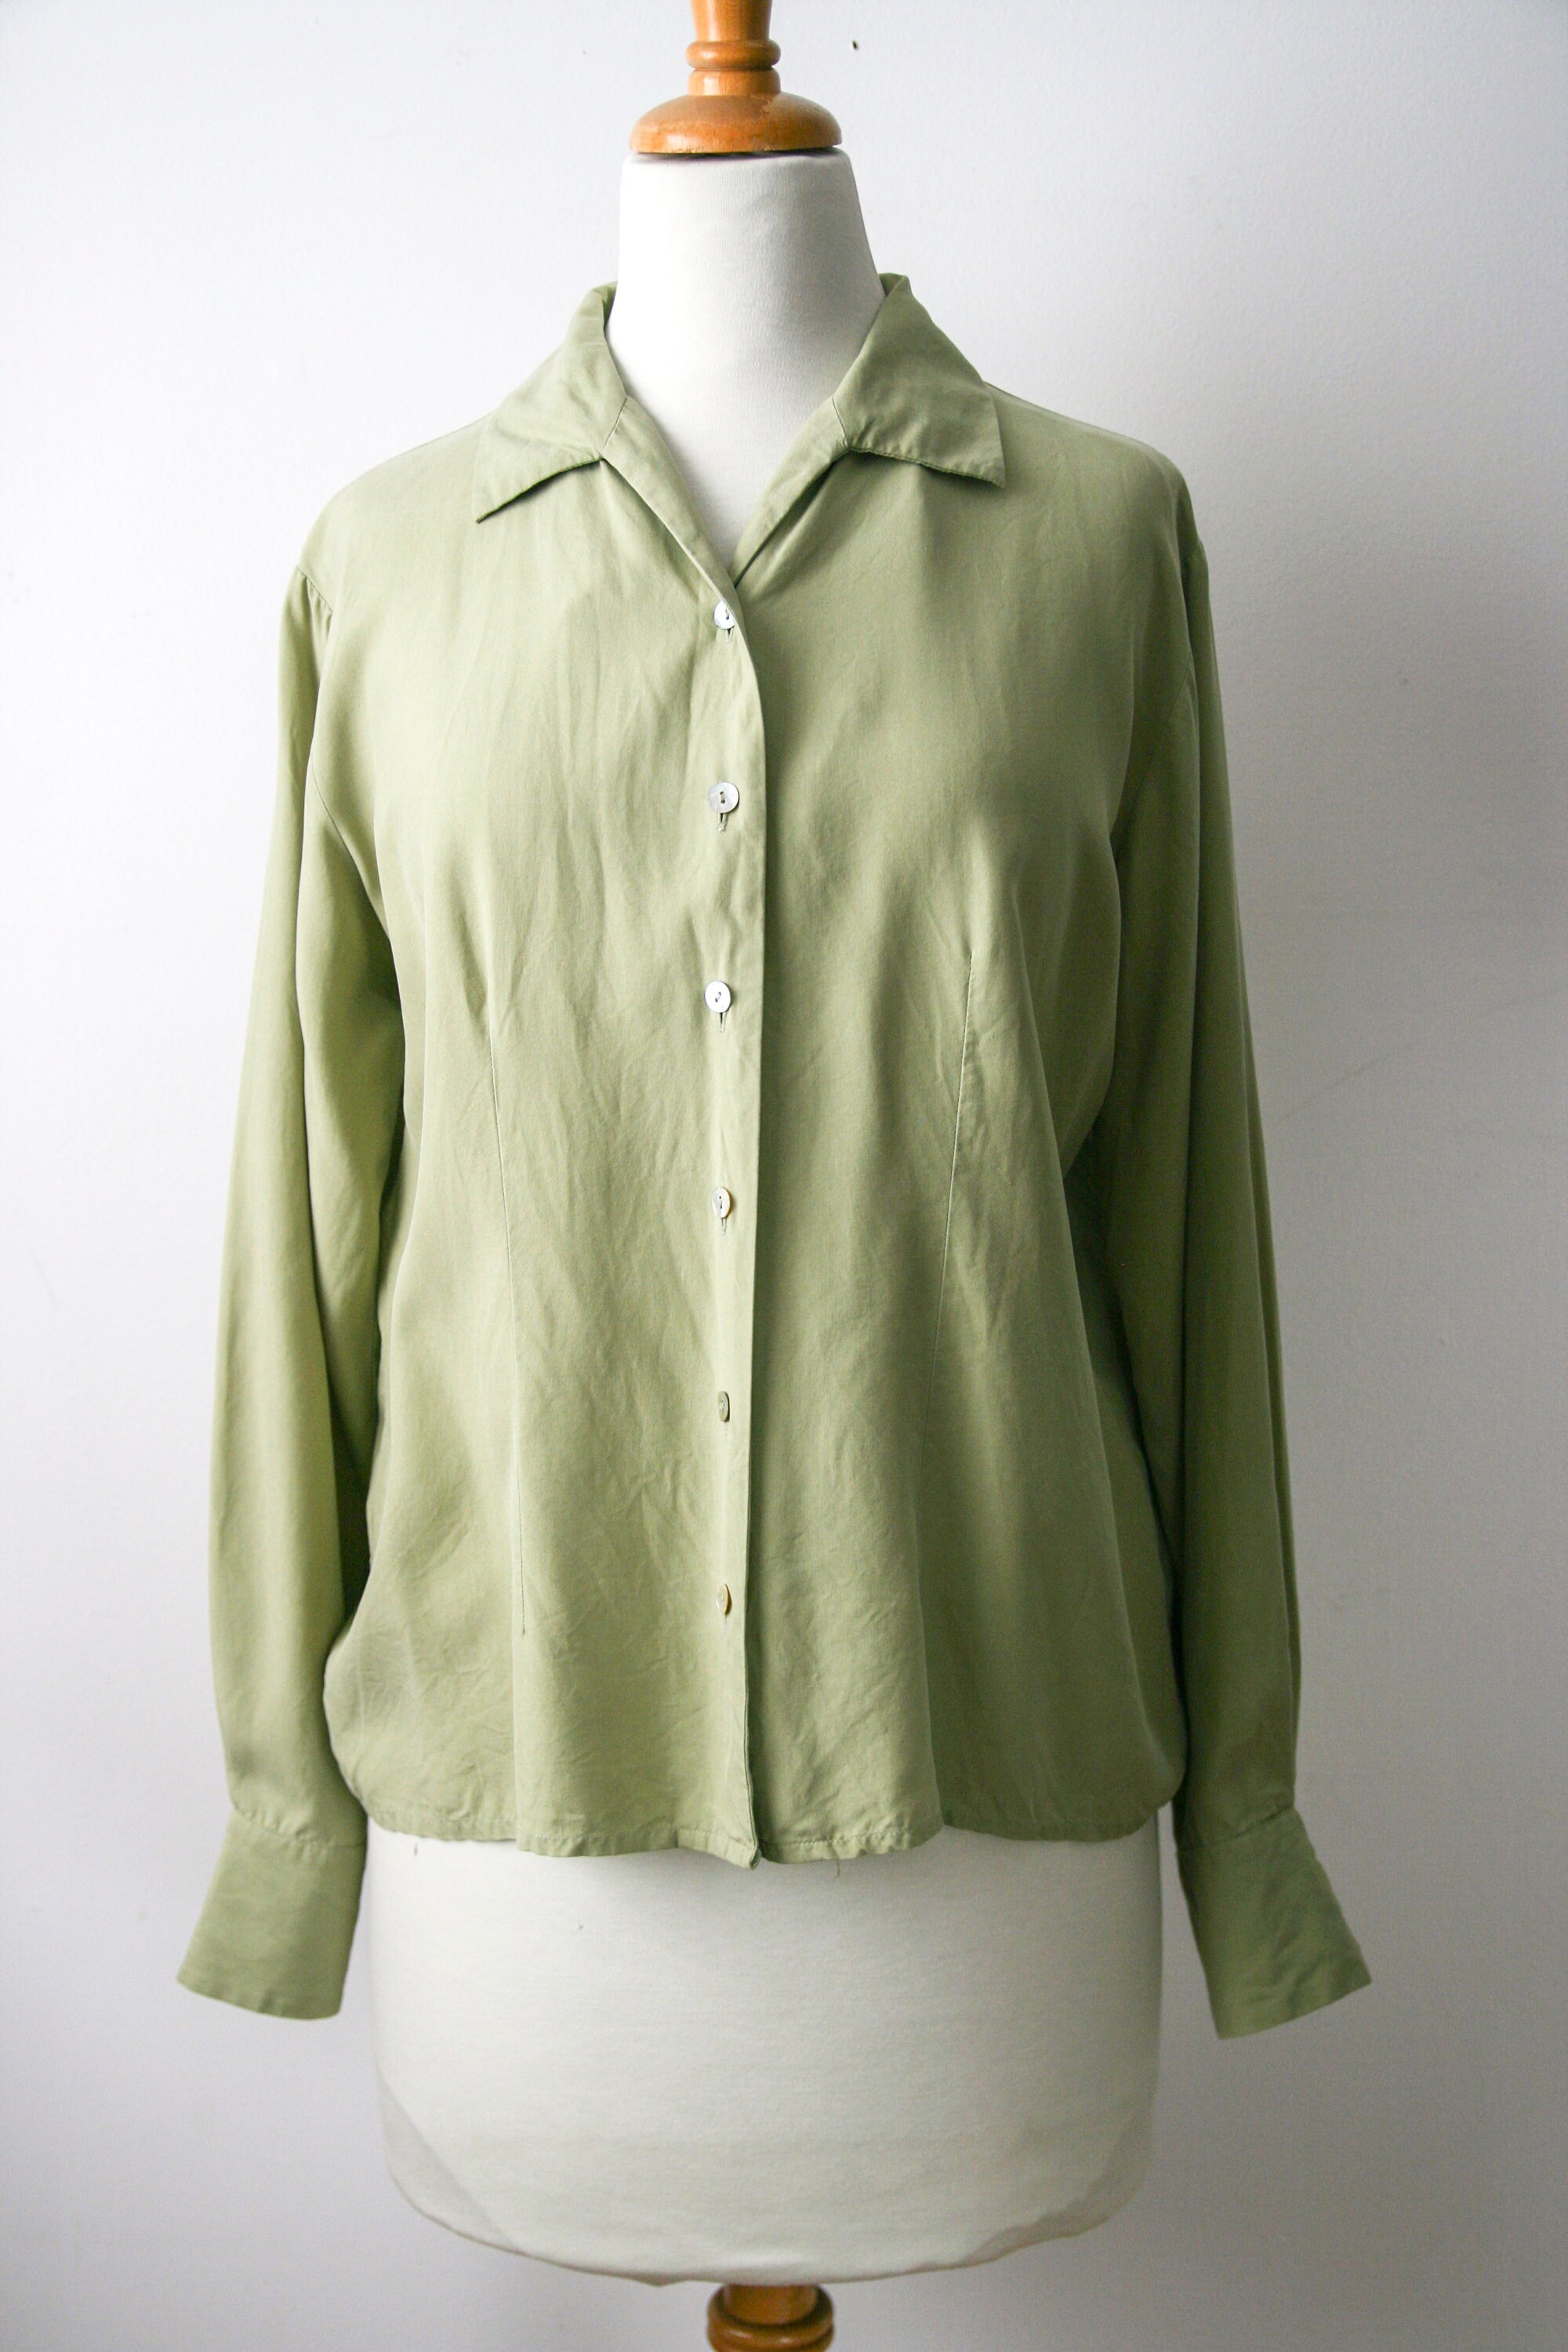 Vintage Silk Blouse Light Chartreuse Pale Green Button Up | Etsy